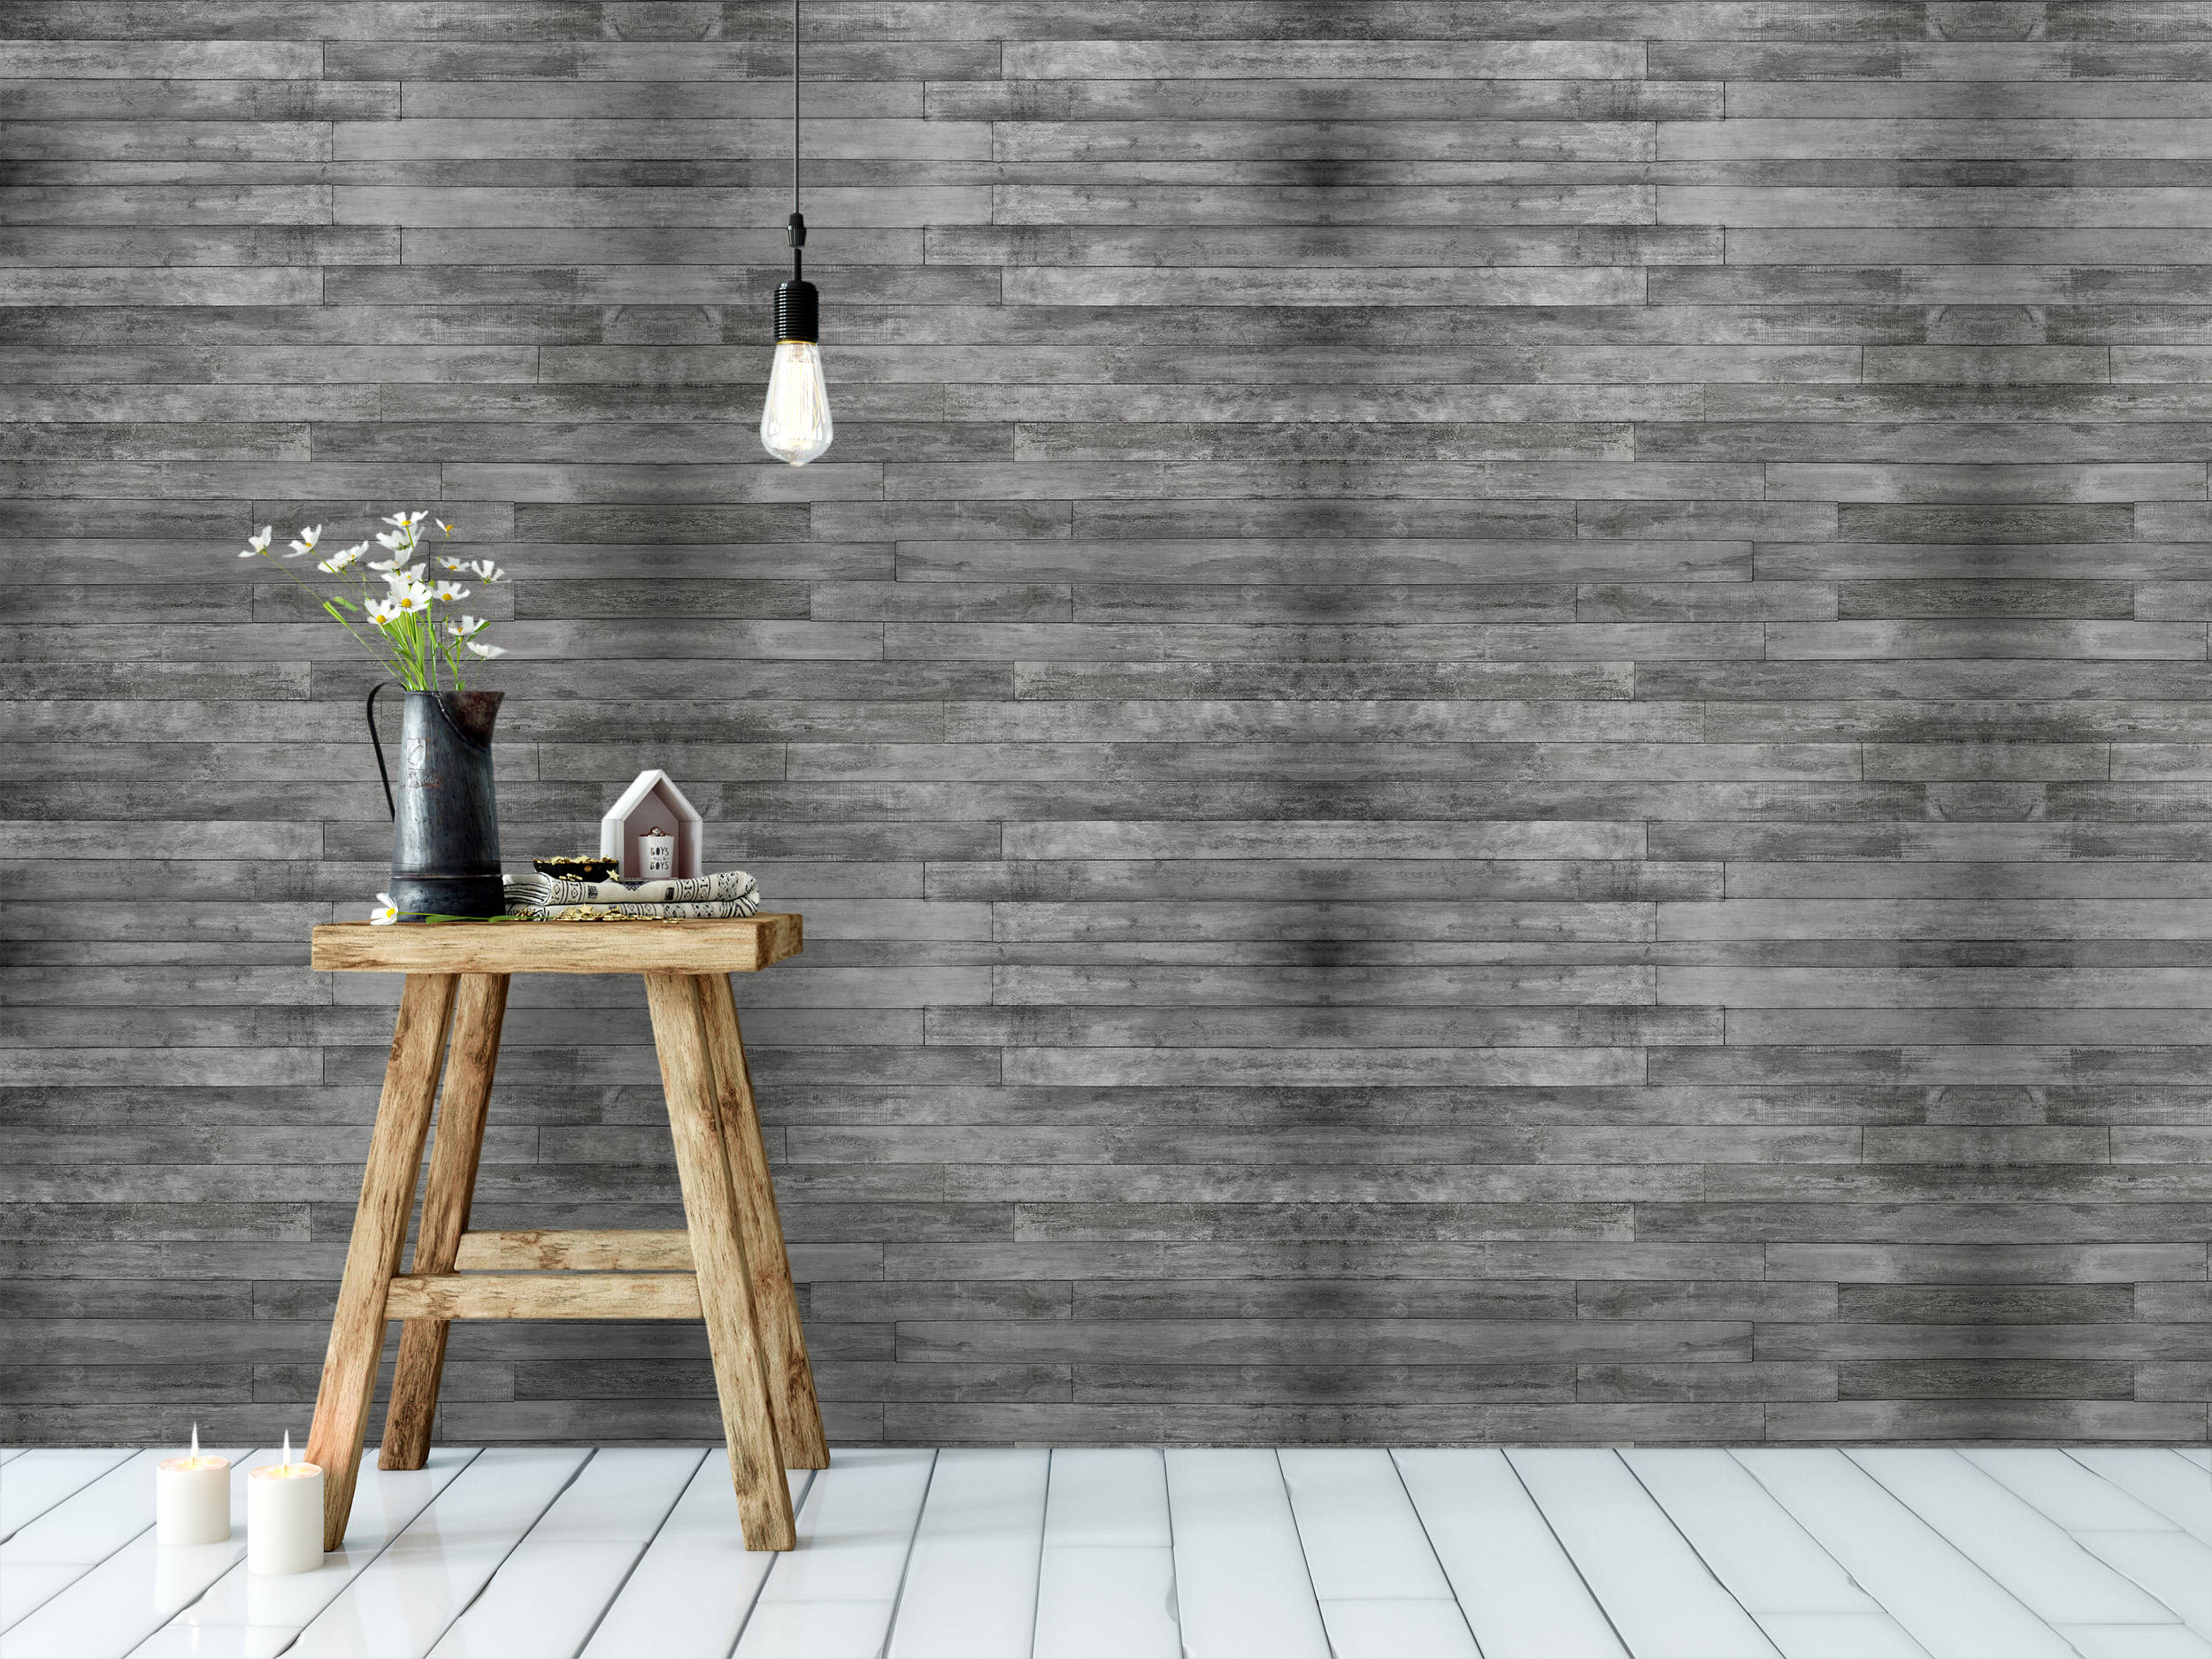 CostaCover Distressed Rustic Wood Plank Wallpaper